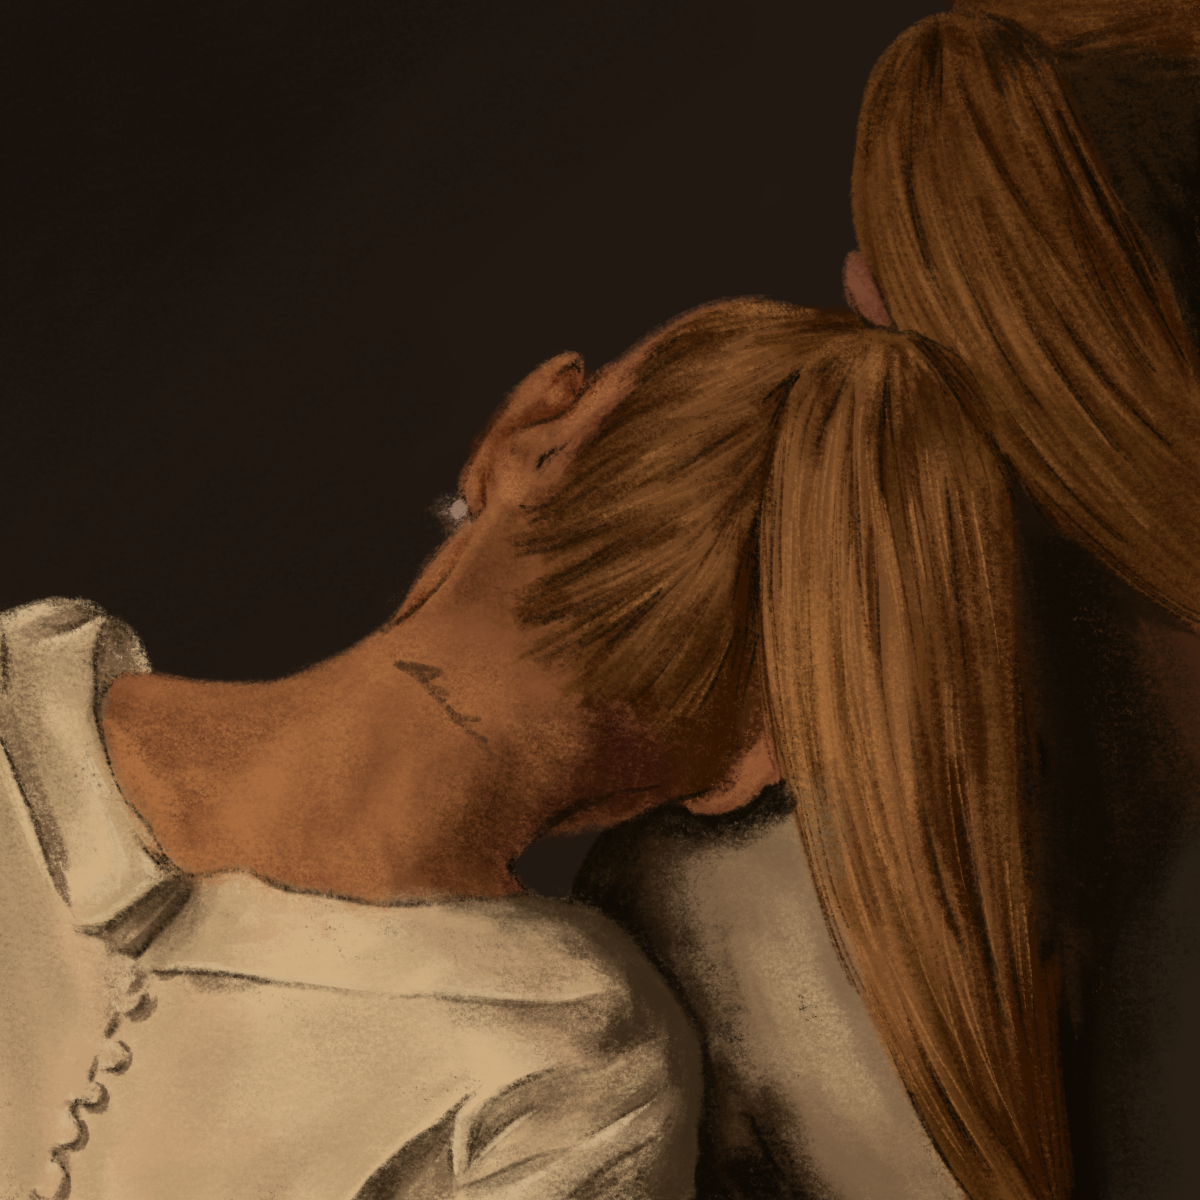 An illustration of Ariana Grande facing away and leaning against another version of herself.